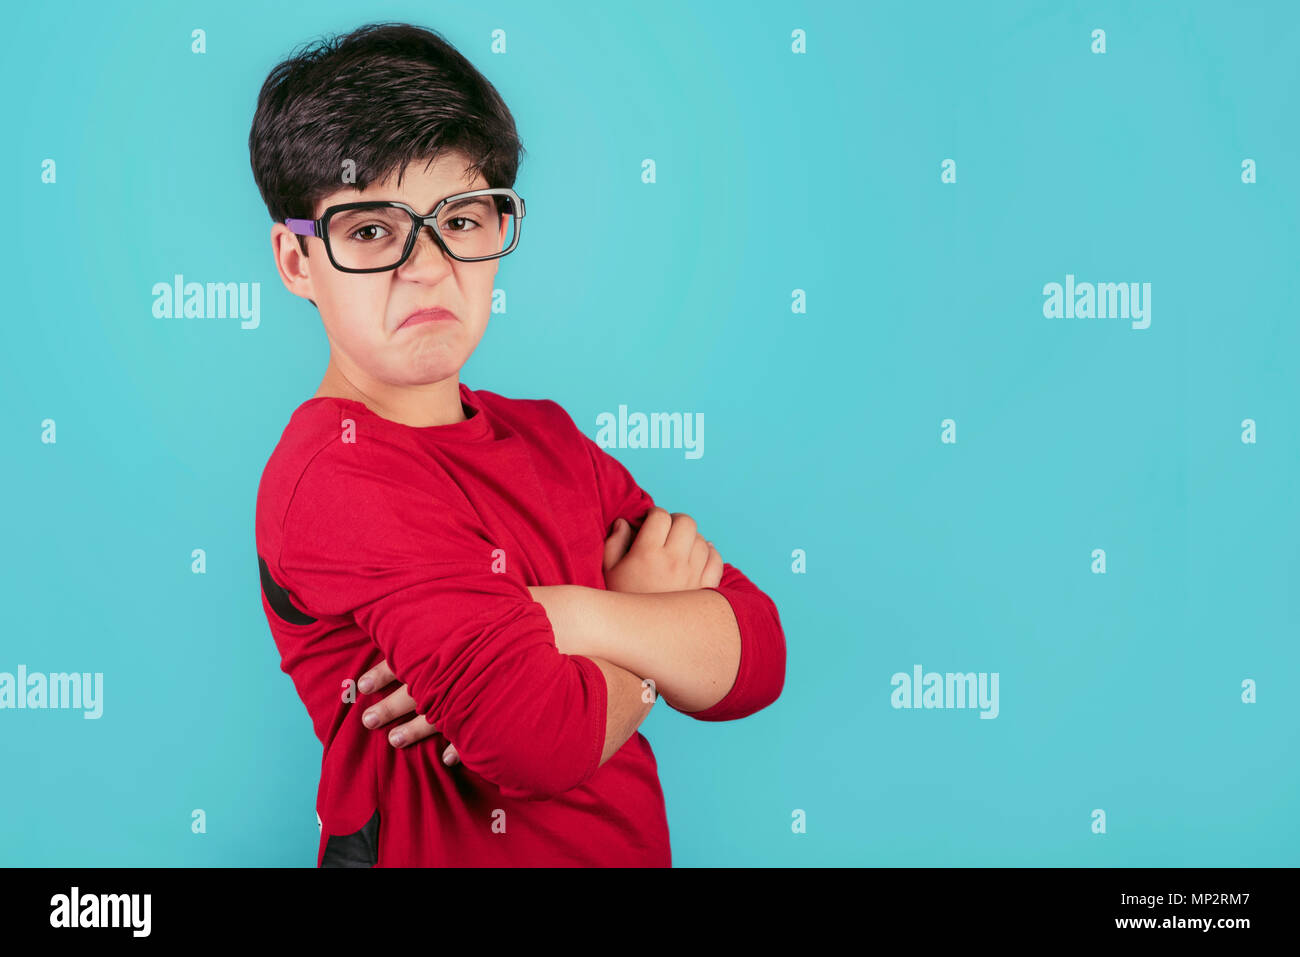 angry boy with glasses on blue background angry boy with glasses on blue background Stock Photo